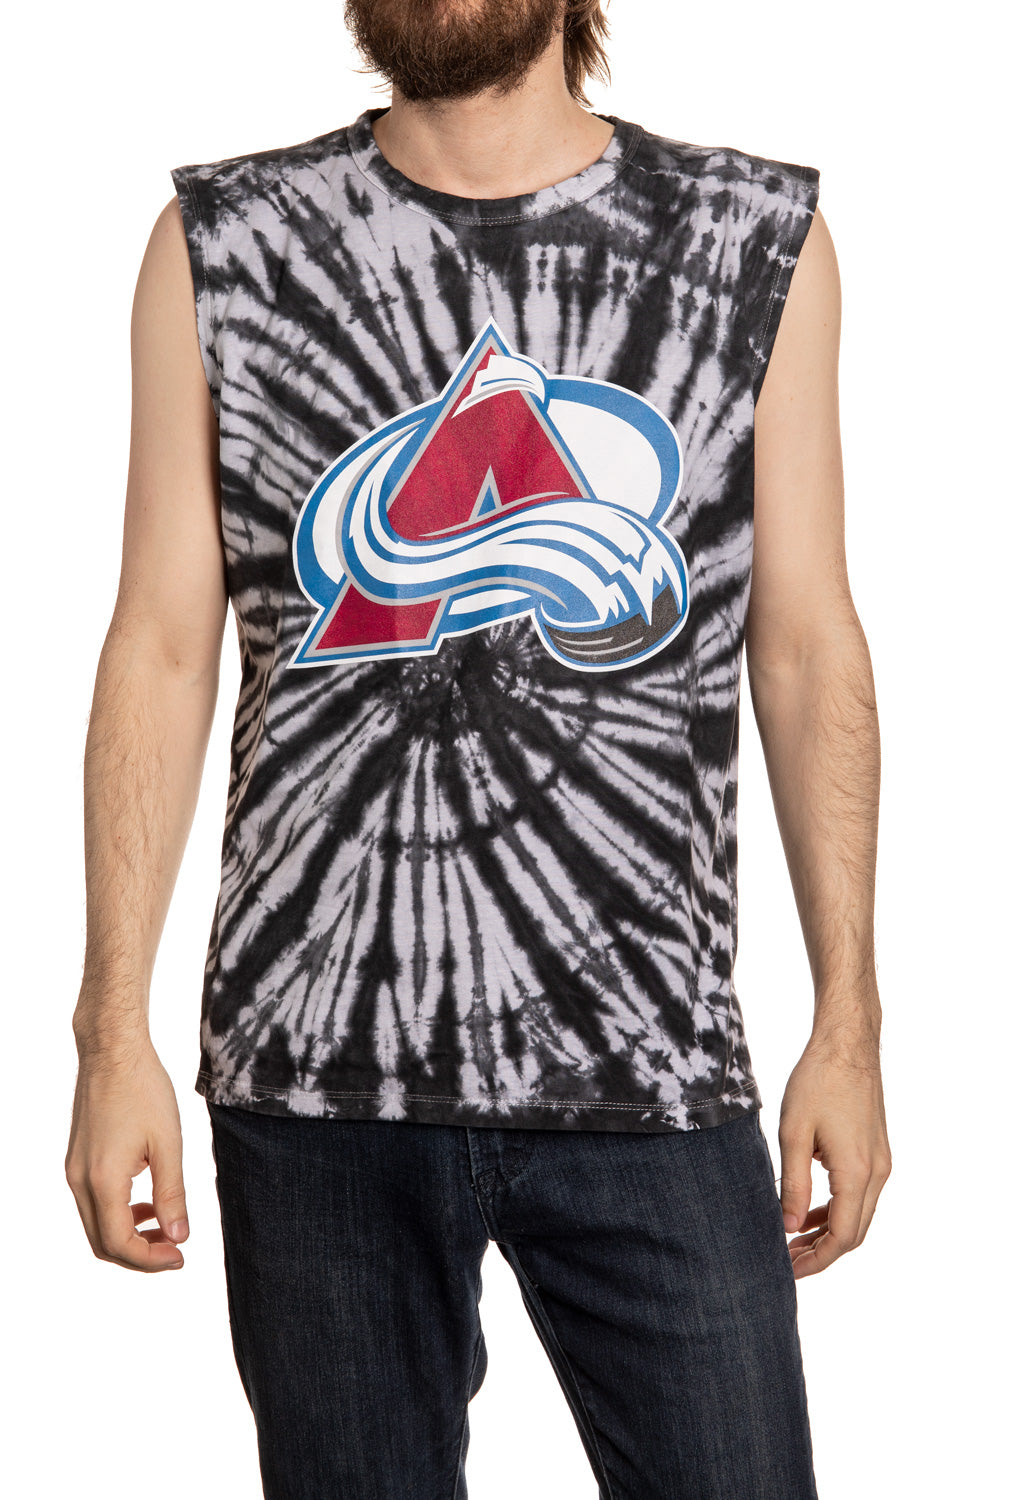 Colorado Avalanche Spiral Tie Dye Sleeveless Shirt Front View